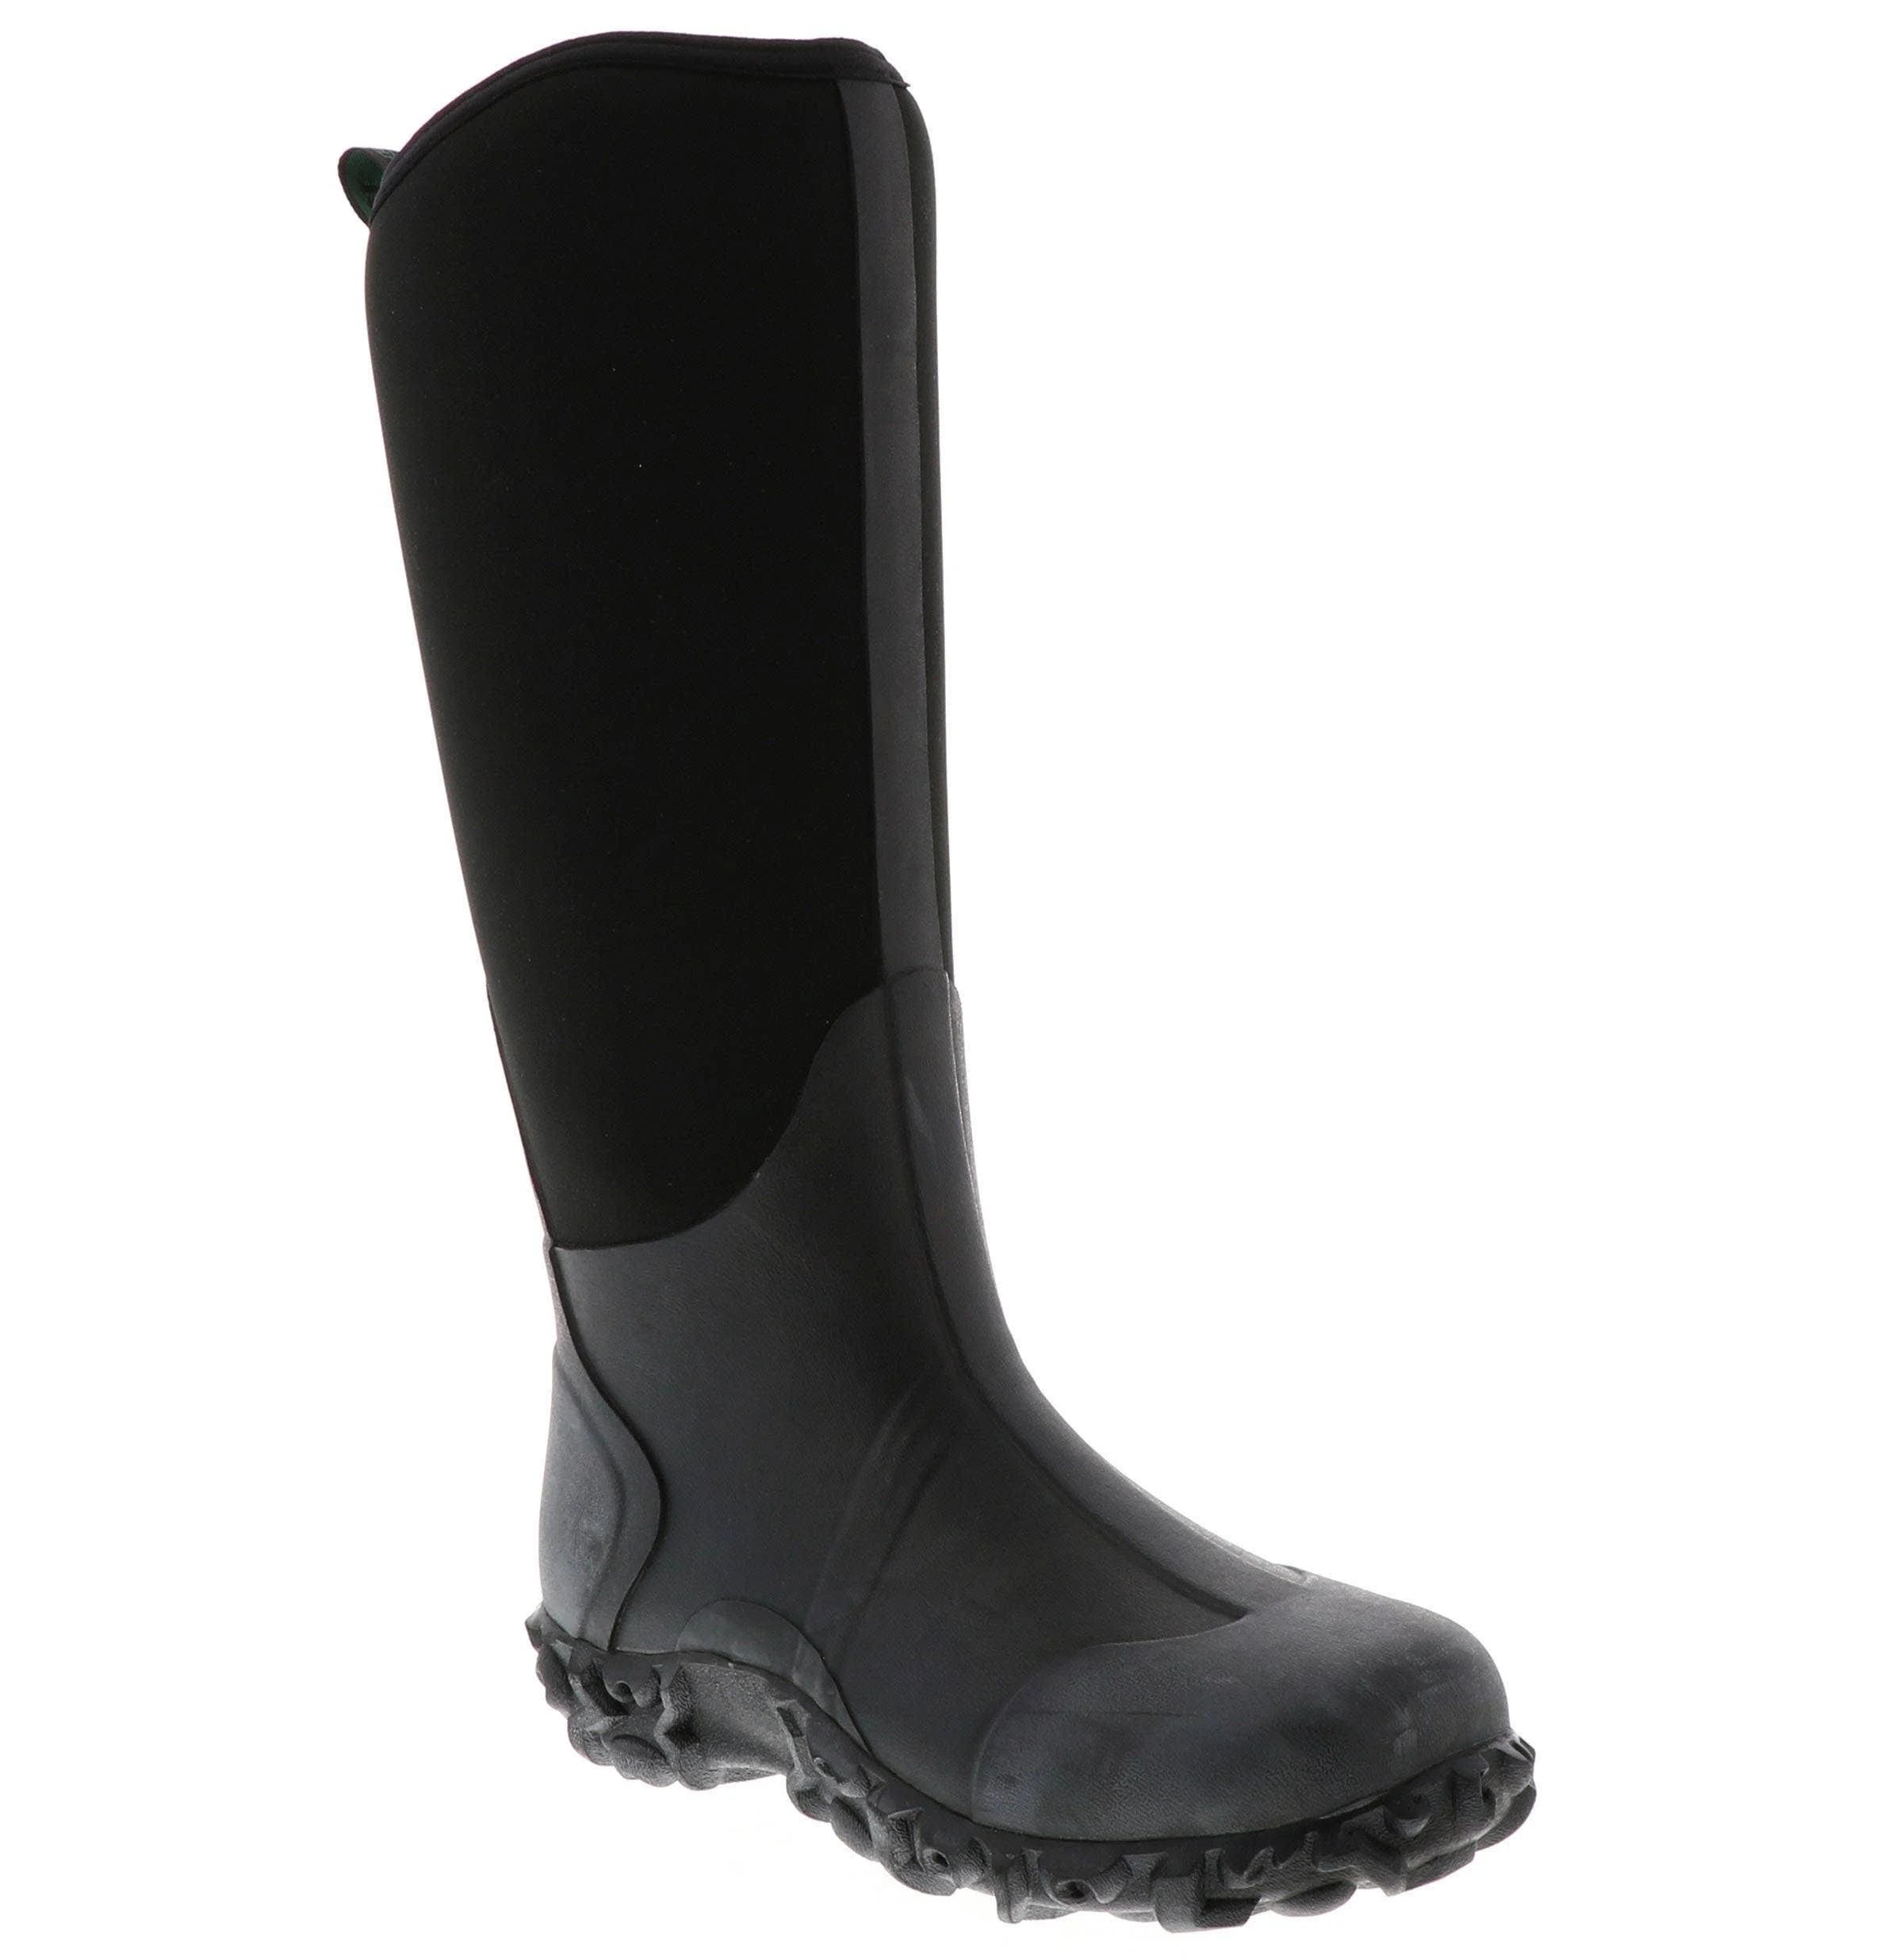 Waterproof Neoprene Flap Over Boots with Cushioned Insole | Image